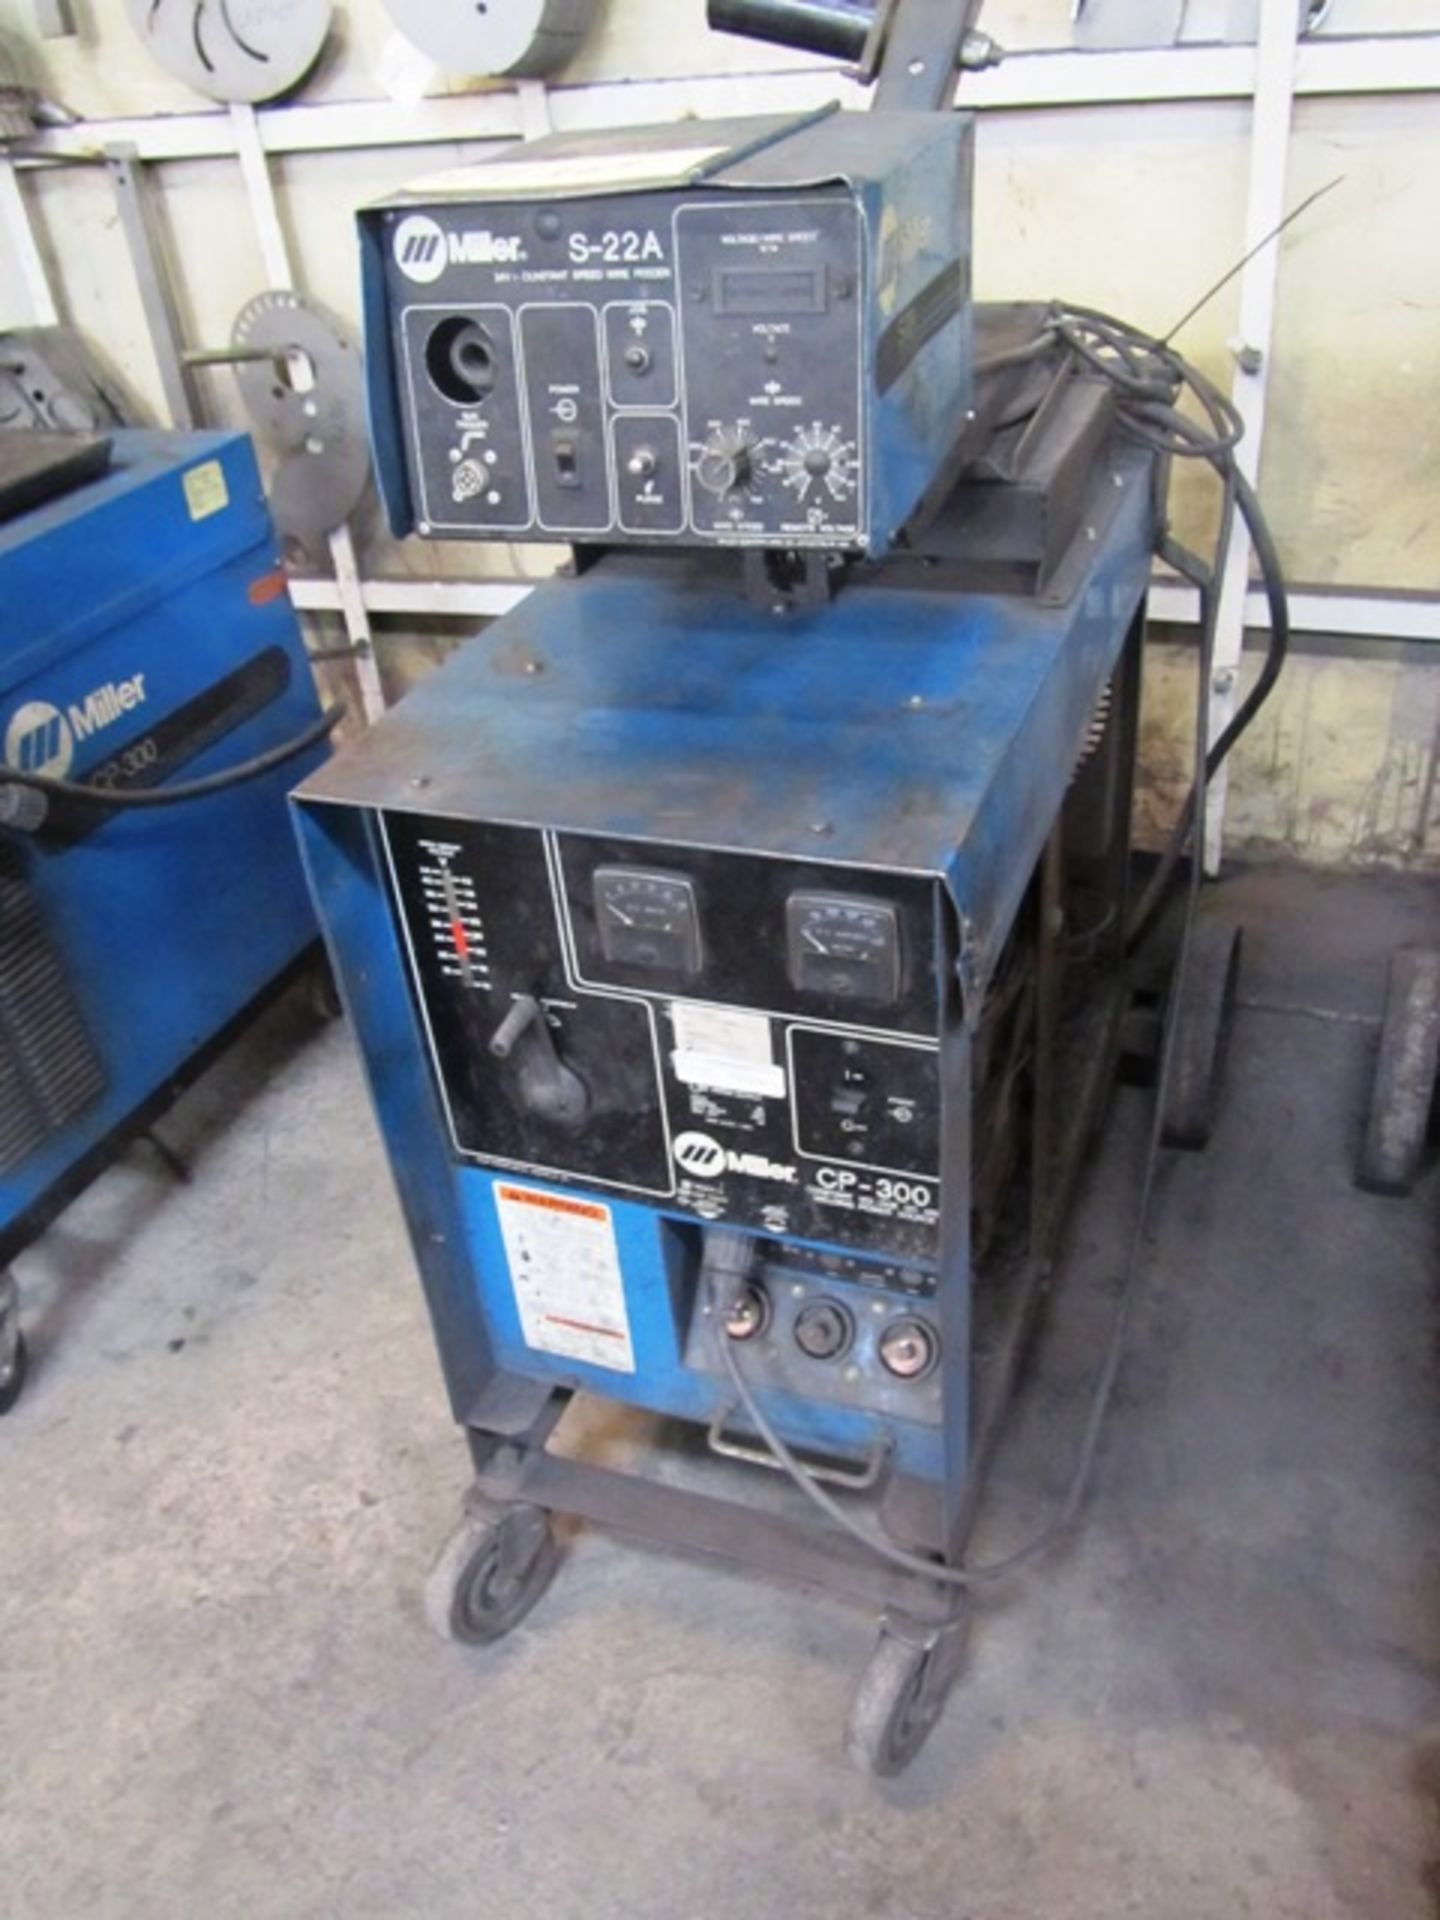 Miller CP-300 Portable Mig Welder with Miller S-22A 24V Constant Speed Wire Feeder (may need